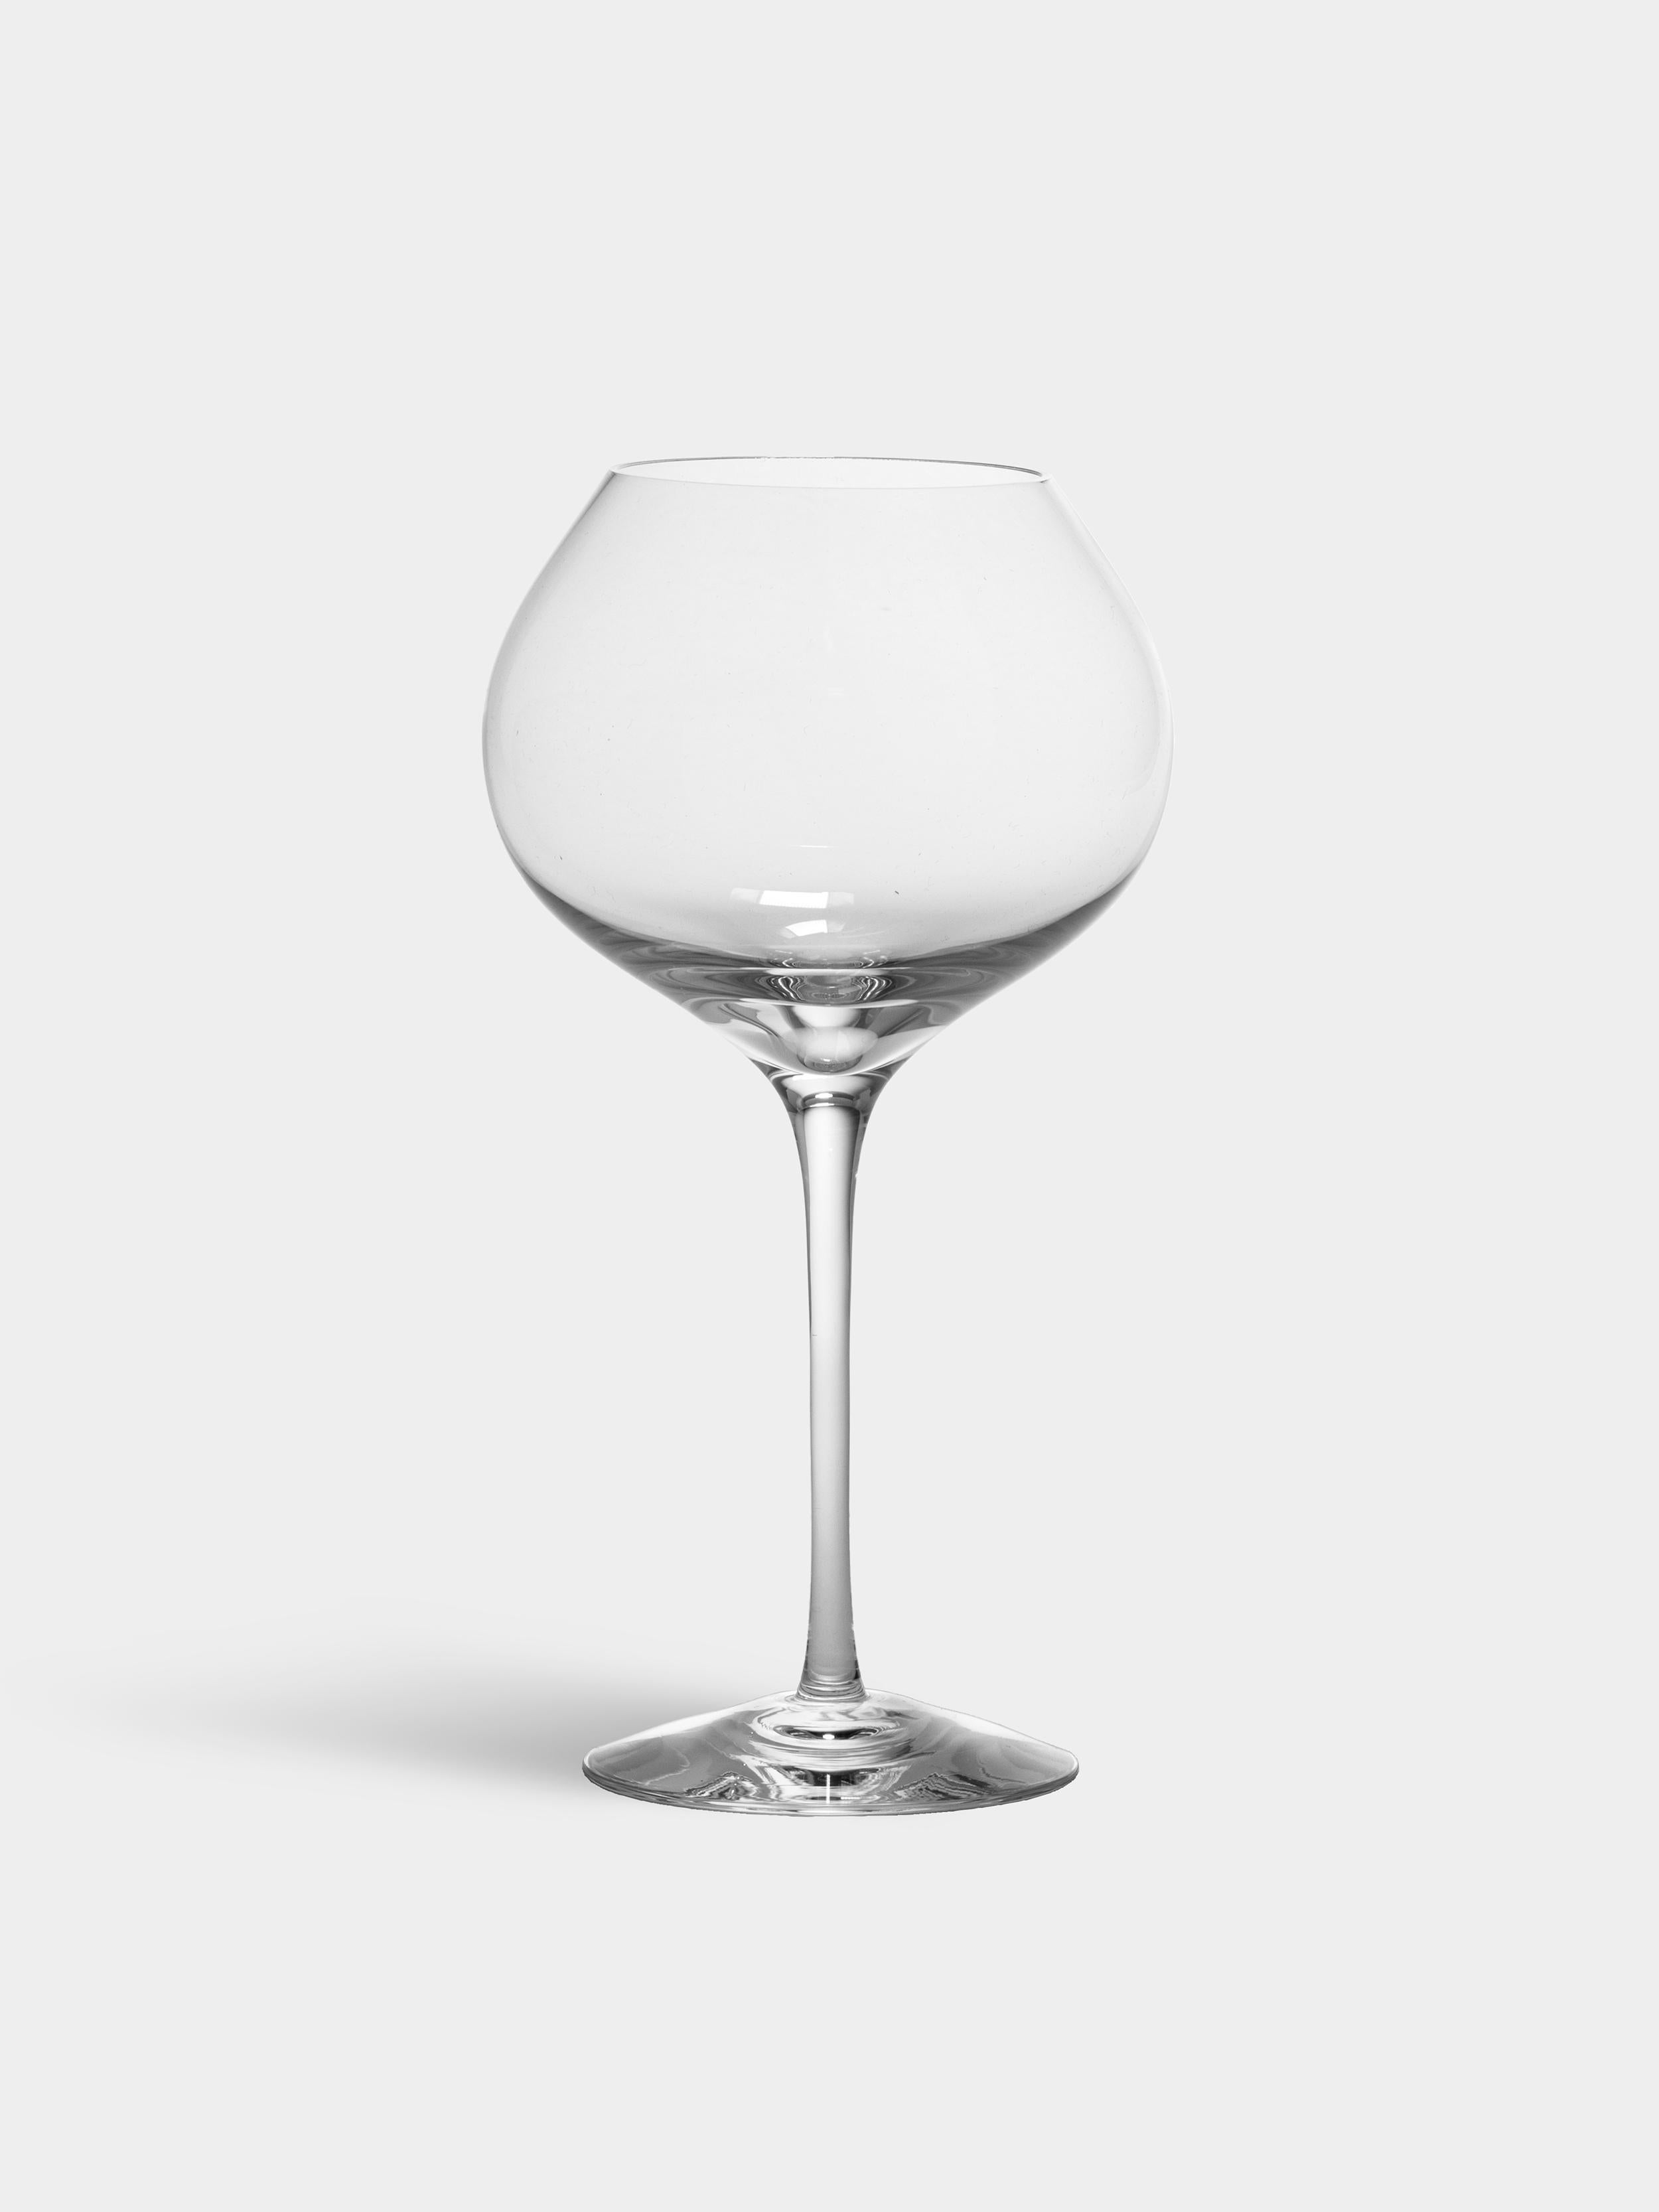 Difference Mature from Orrefors holds 22 oz and is suited for any mature red or white wine. The wide bowl elevates the bouquet of the wine and all its nuances. The complex flavors and aromas of mature wines come into their own in this glass.